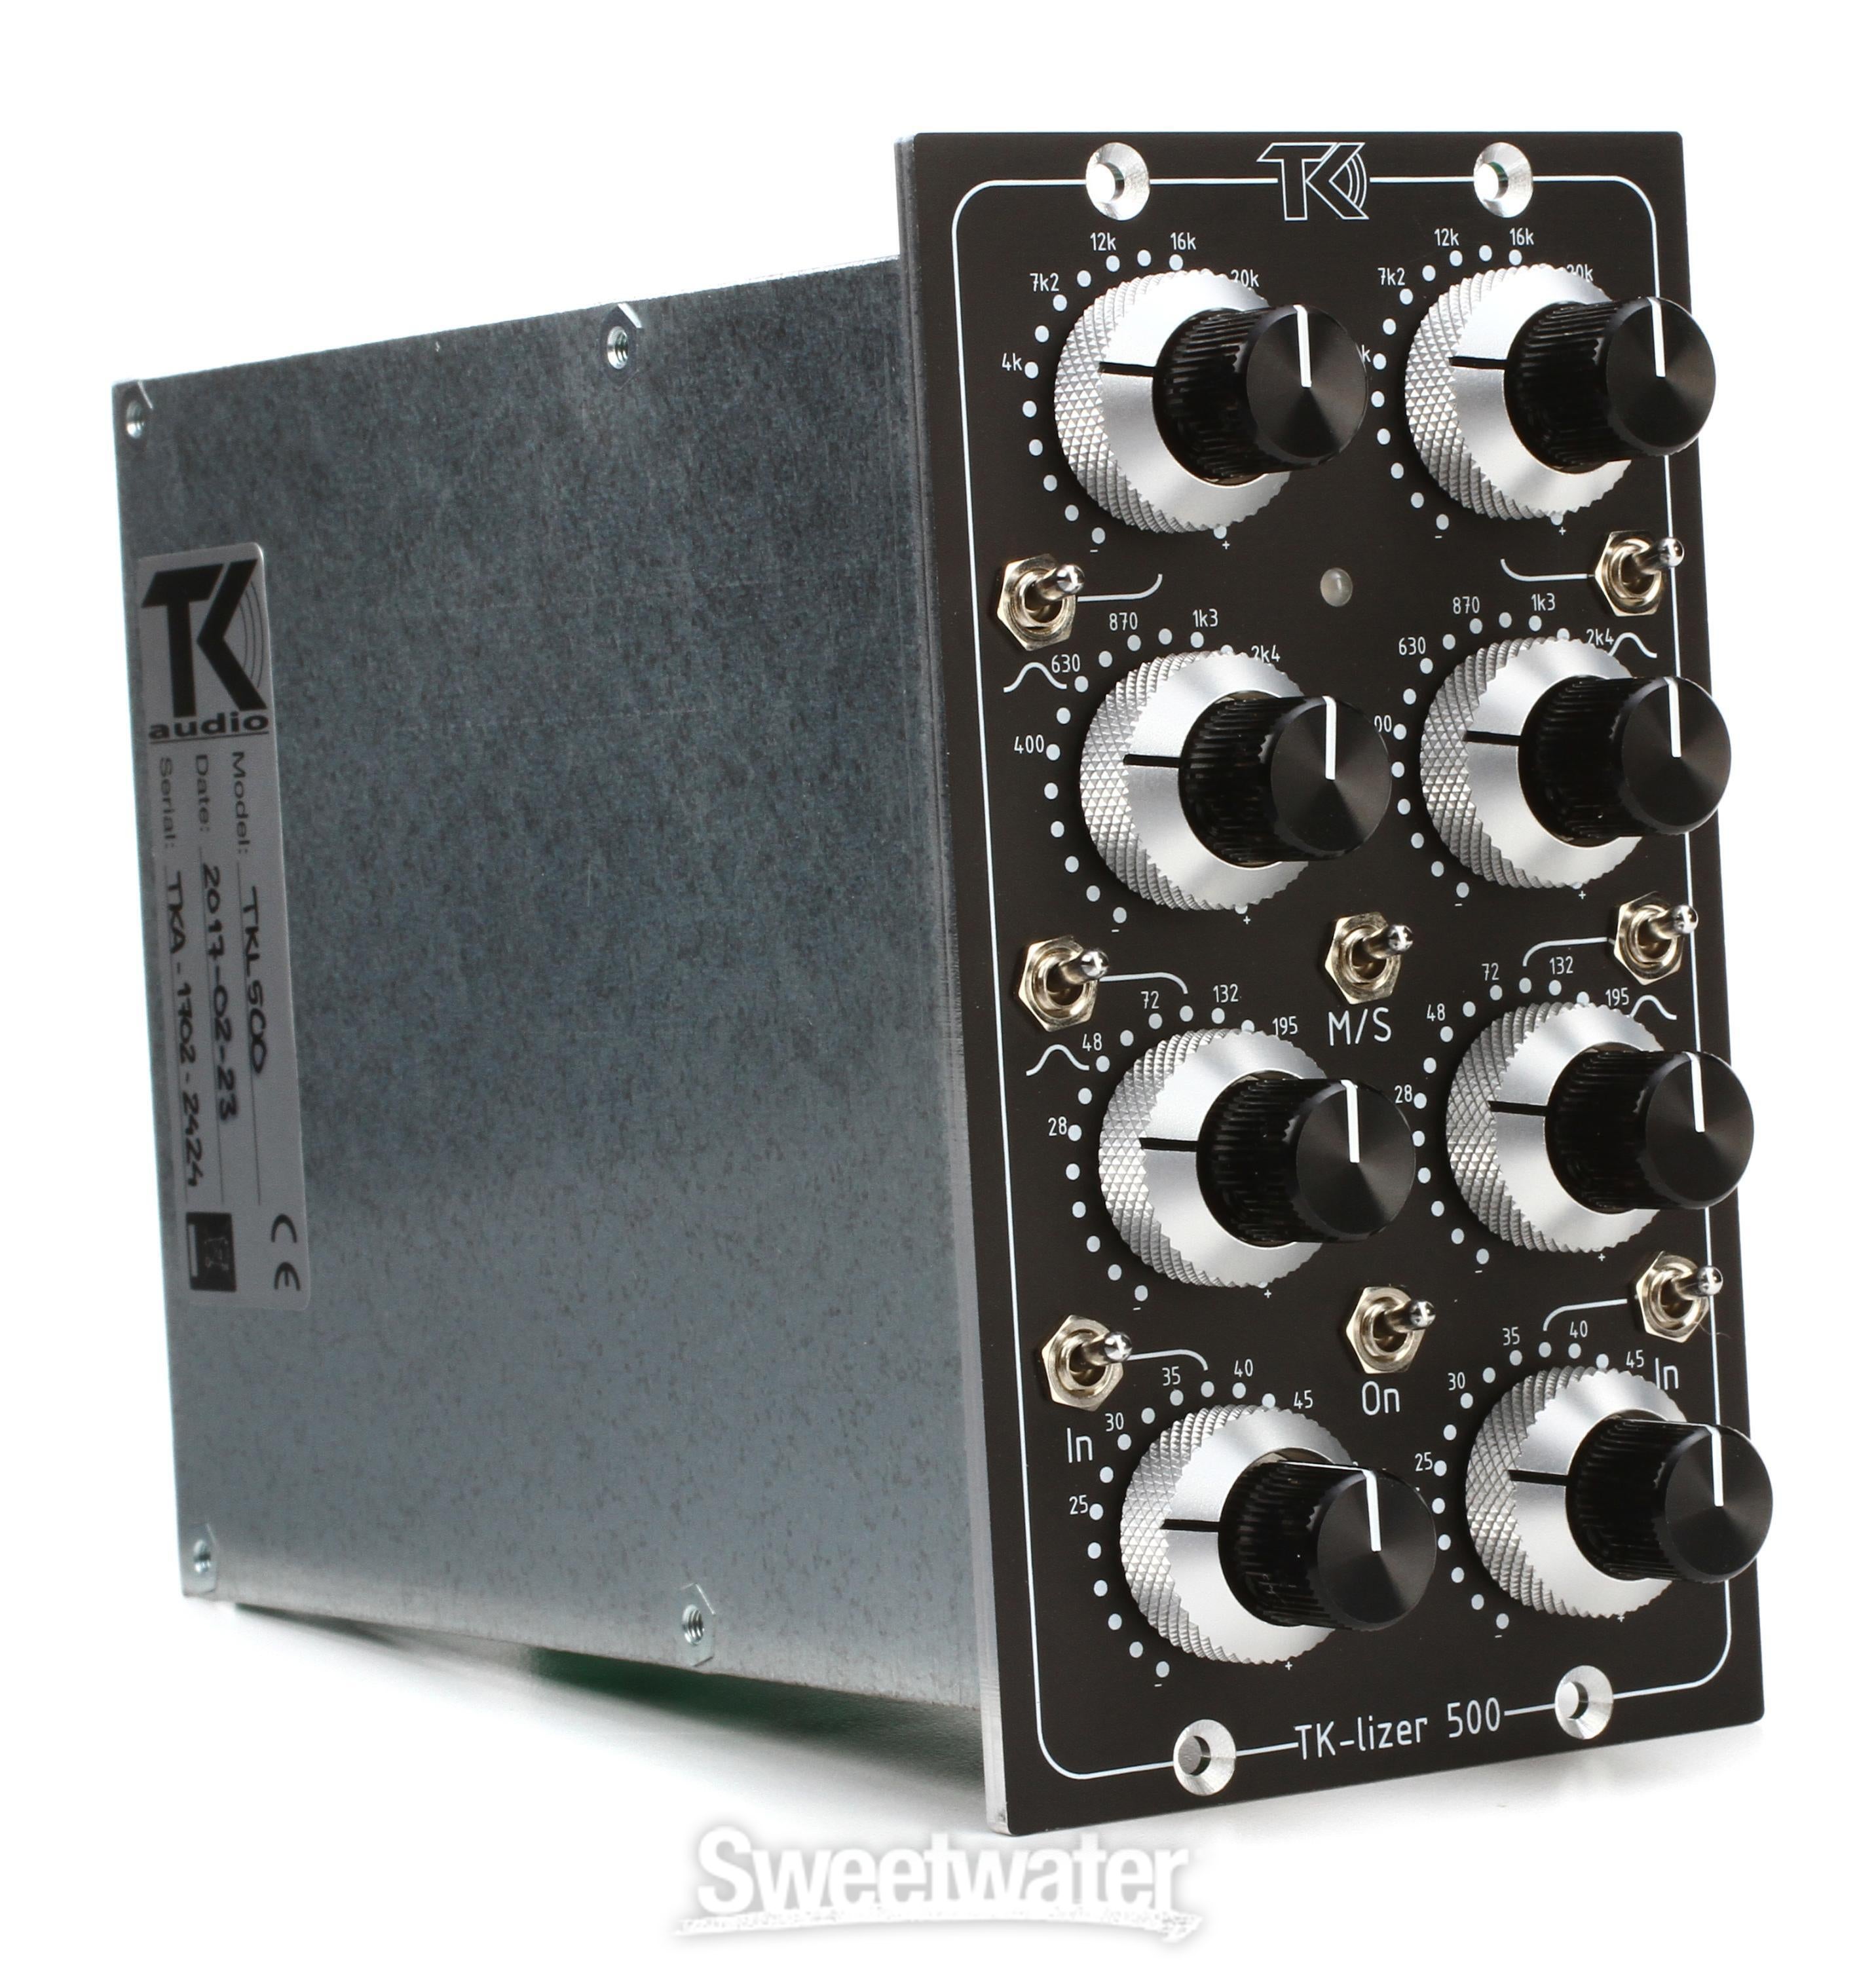 TK Audio TK-lizer 500 500 Series EQ with Mid/Side Processing Reviews |  Sweetwater